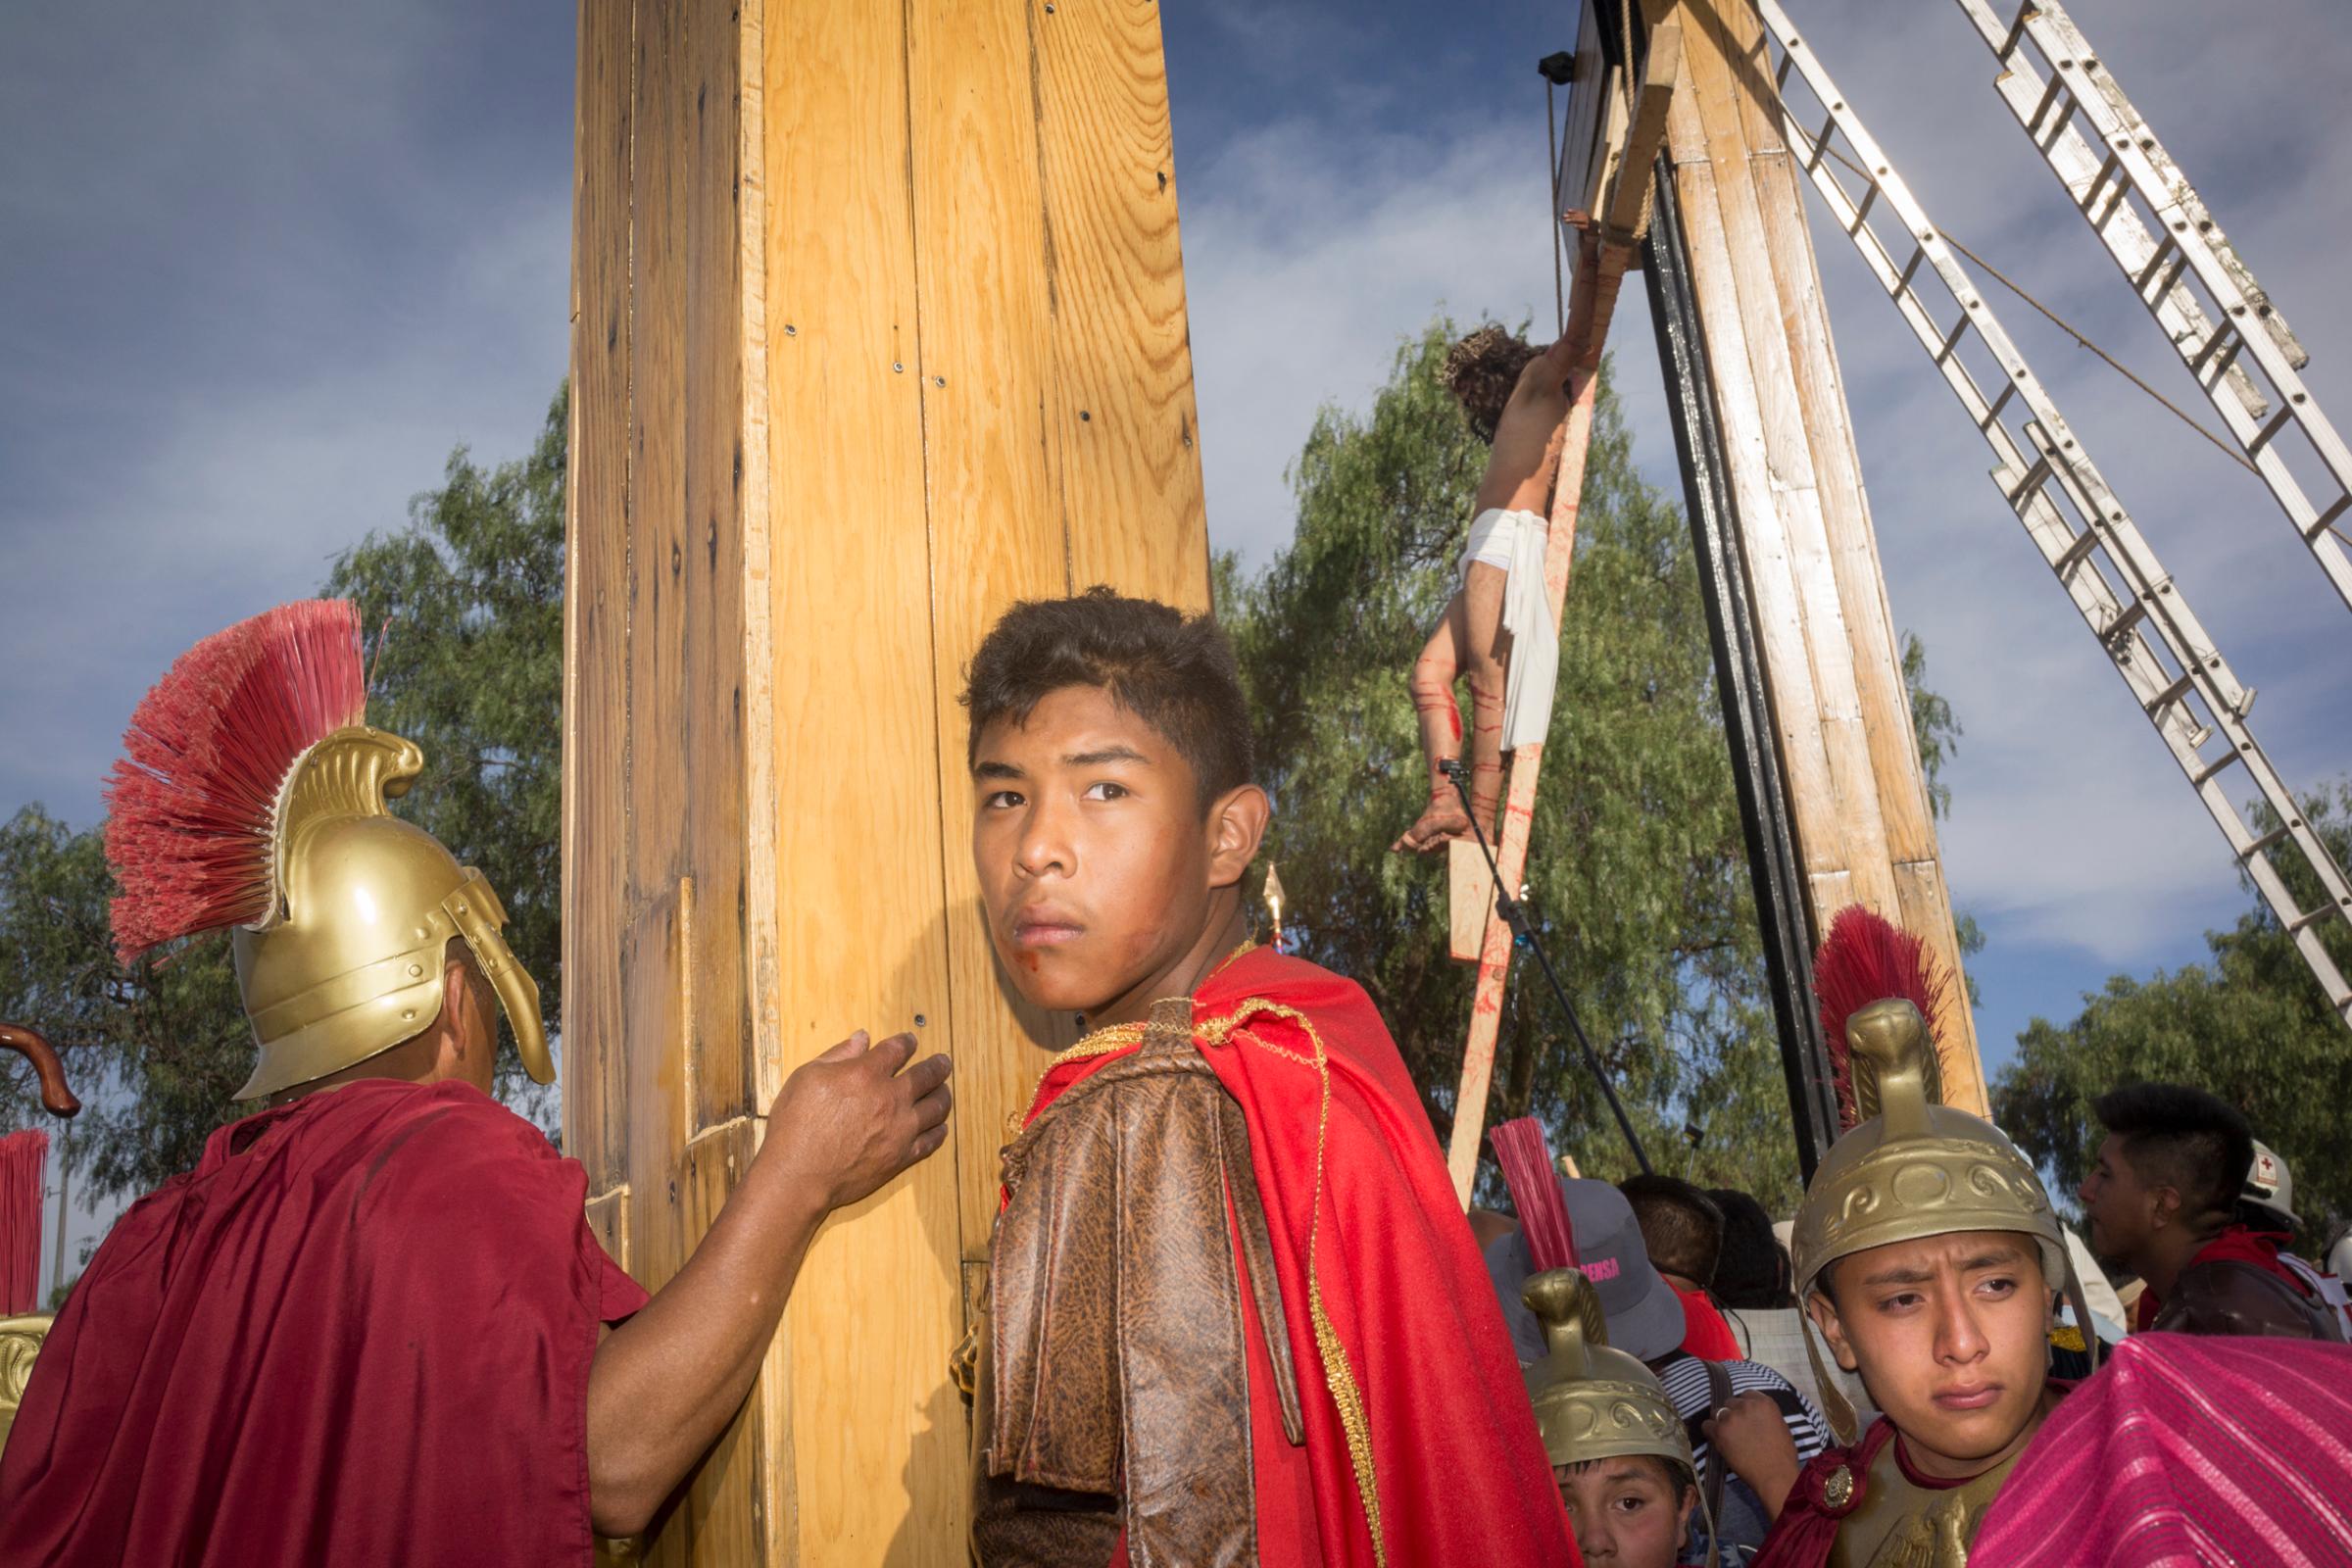 An actor playing the role of a Roman soldier during Holy Week celebrations in Iztapalapa, Mexico.